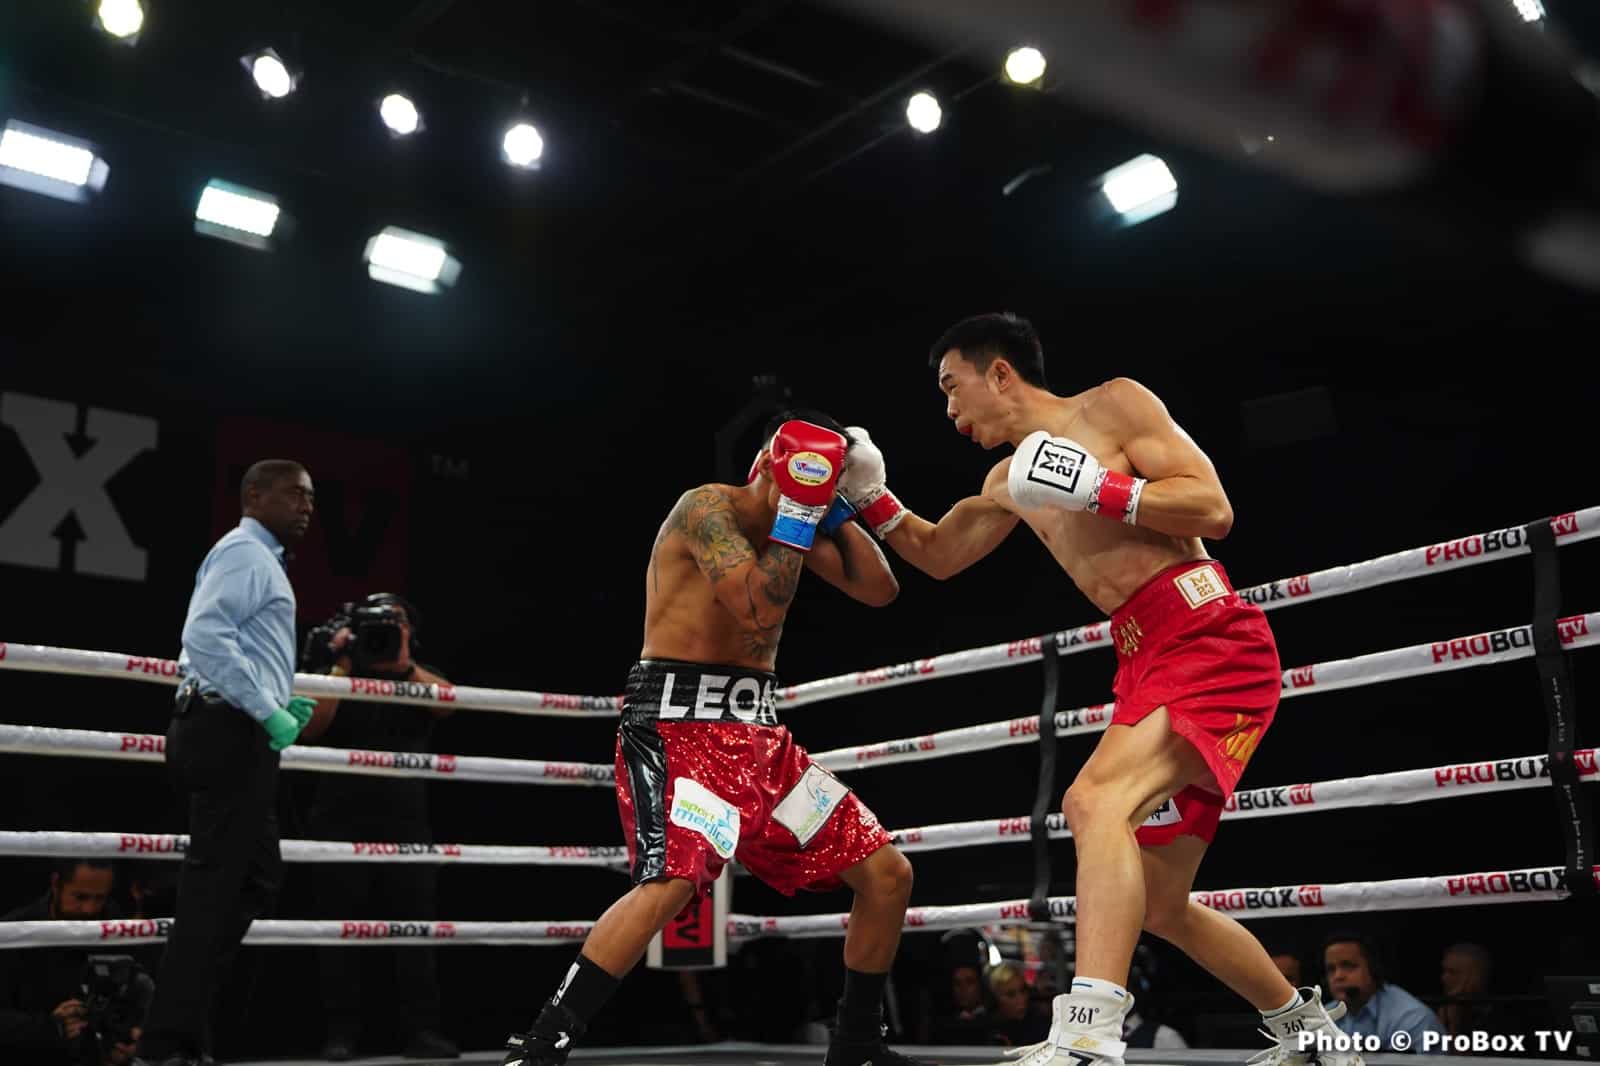 Image: Boxing Results: Can Xu Loses Decision To Brandon Benitez!